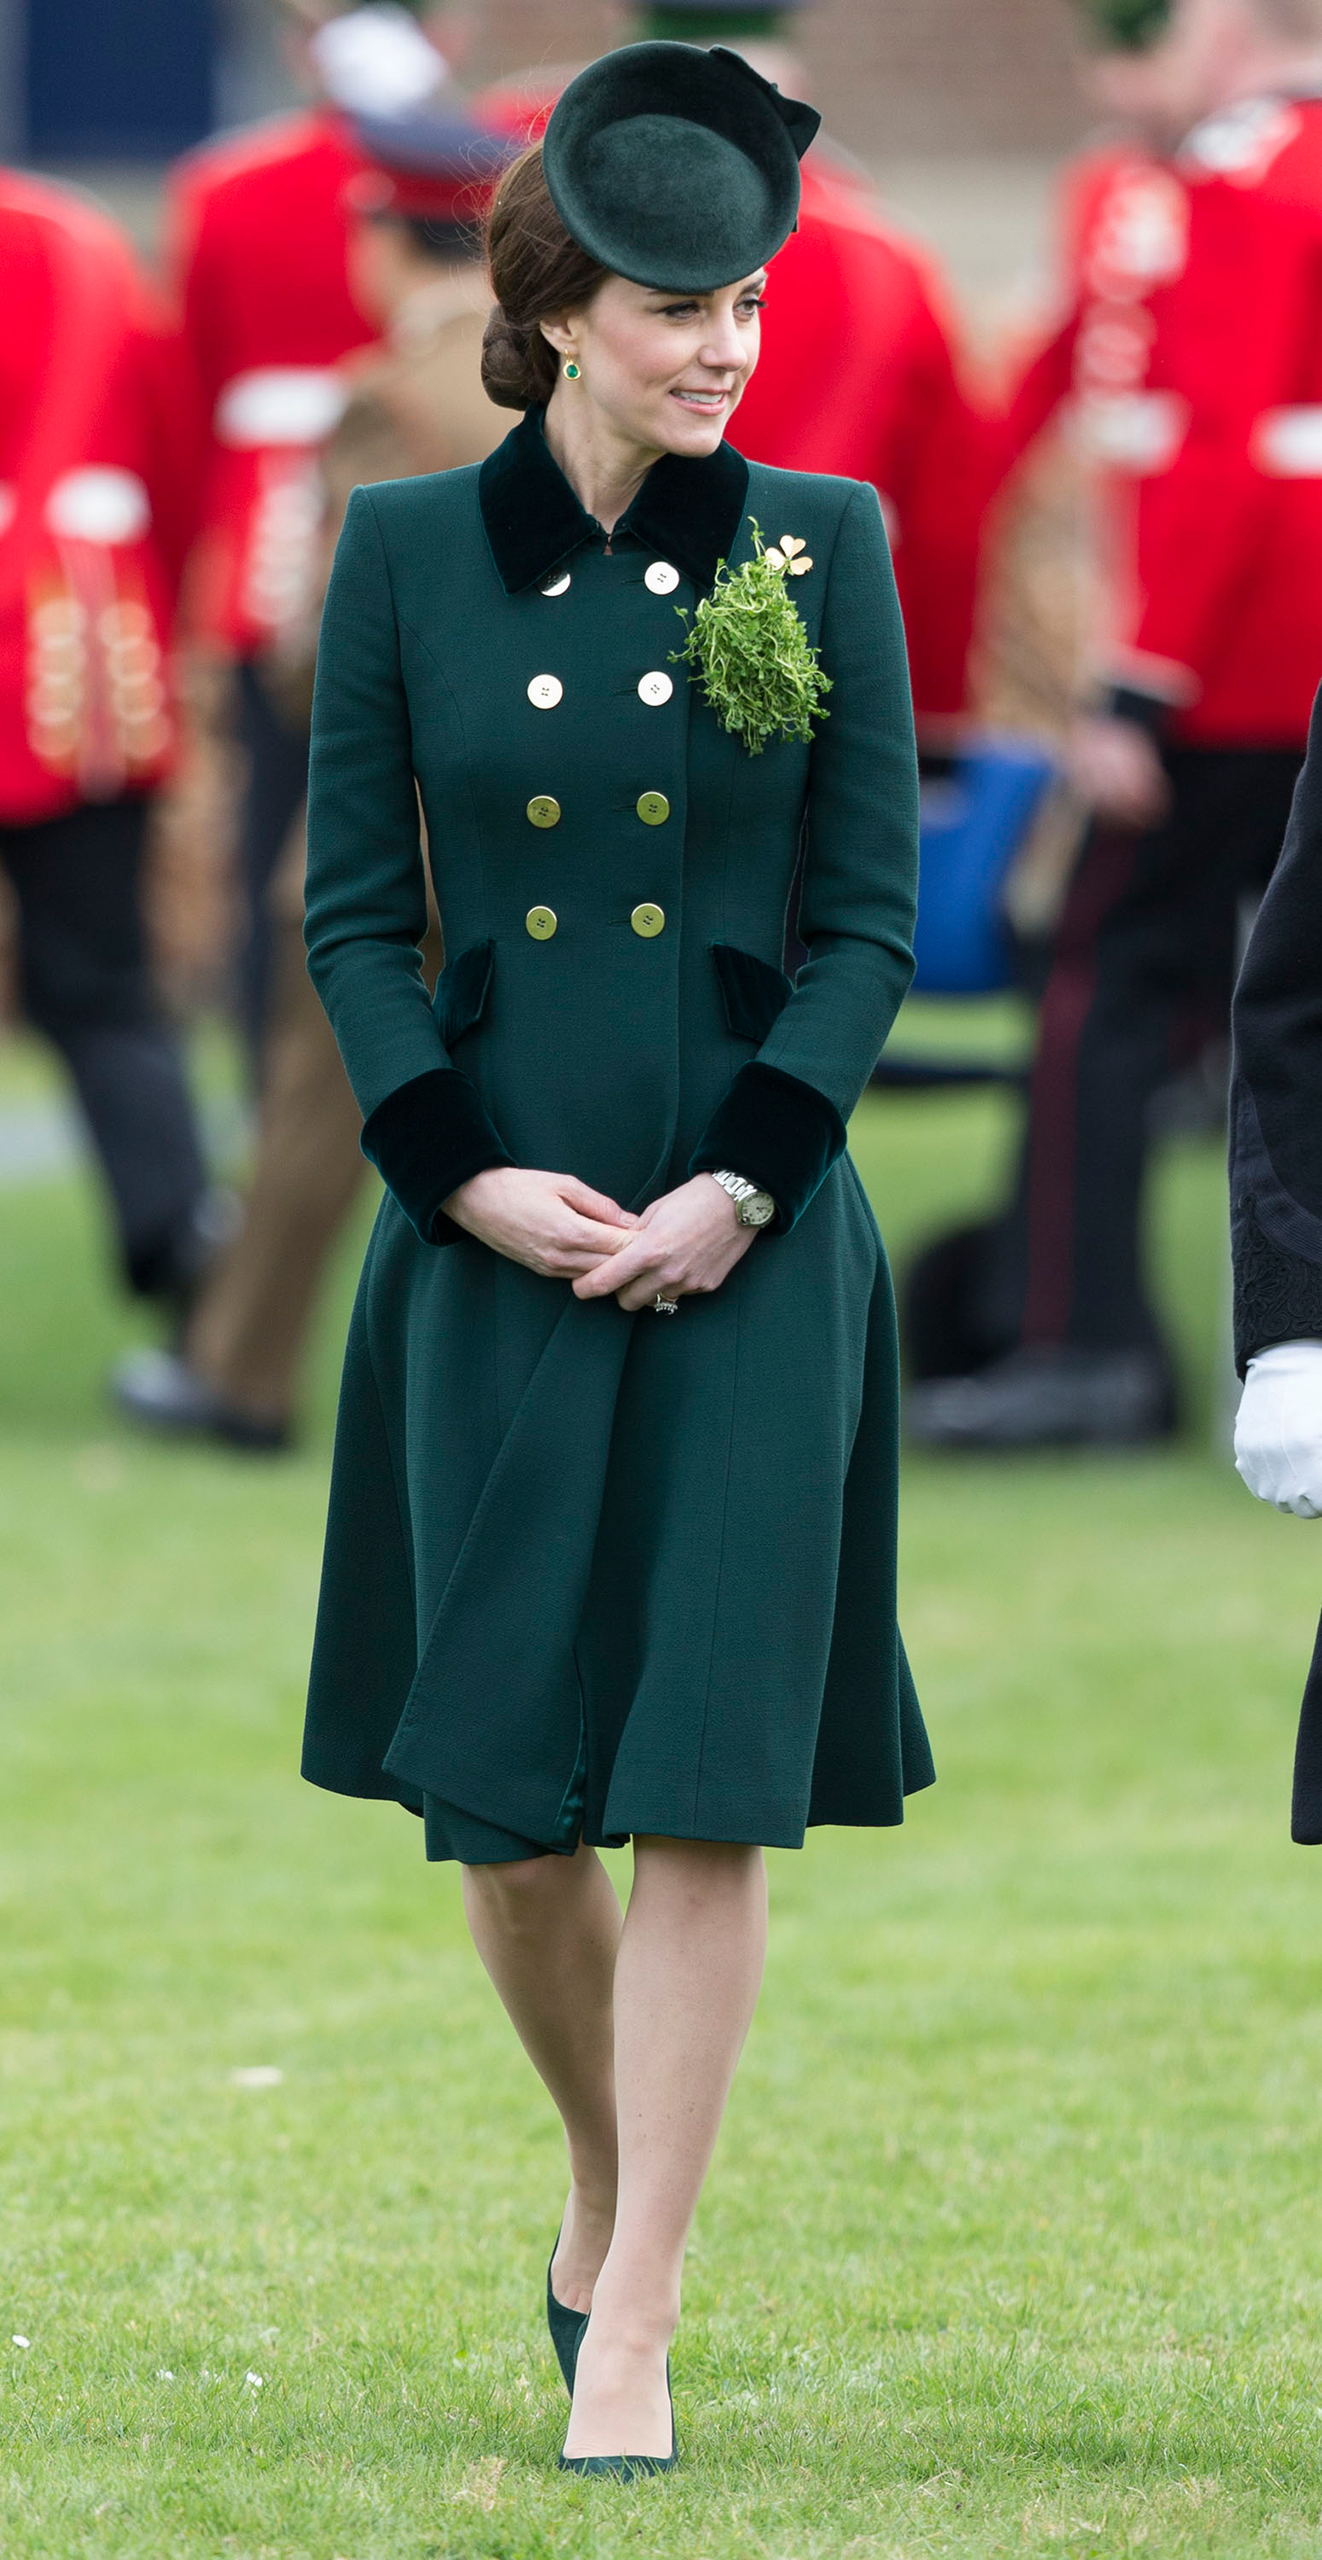 Catherine, Duchess of Cambridge, attends the annual Irish Guards St Patrick's Day Parade at Household Cavalry Barracks in London on March 17, 2017.